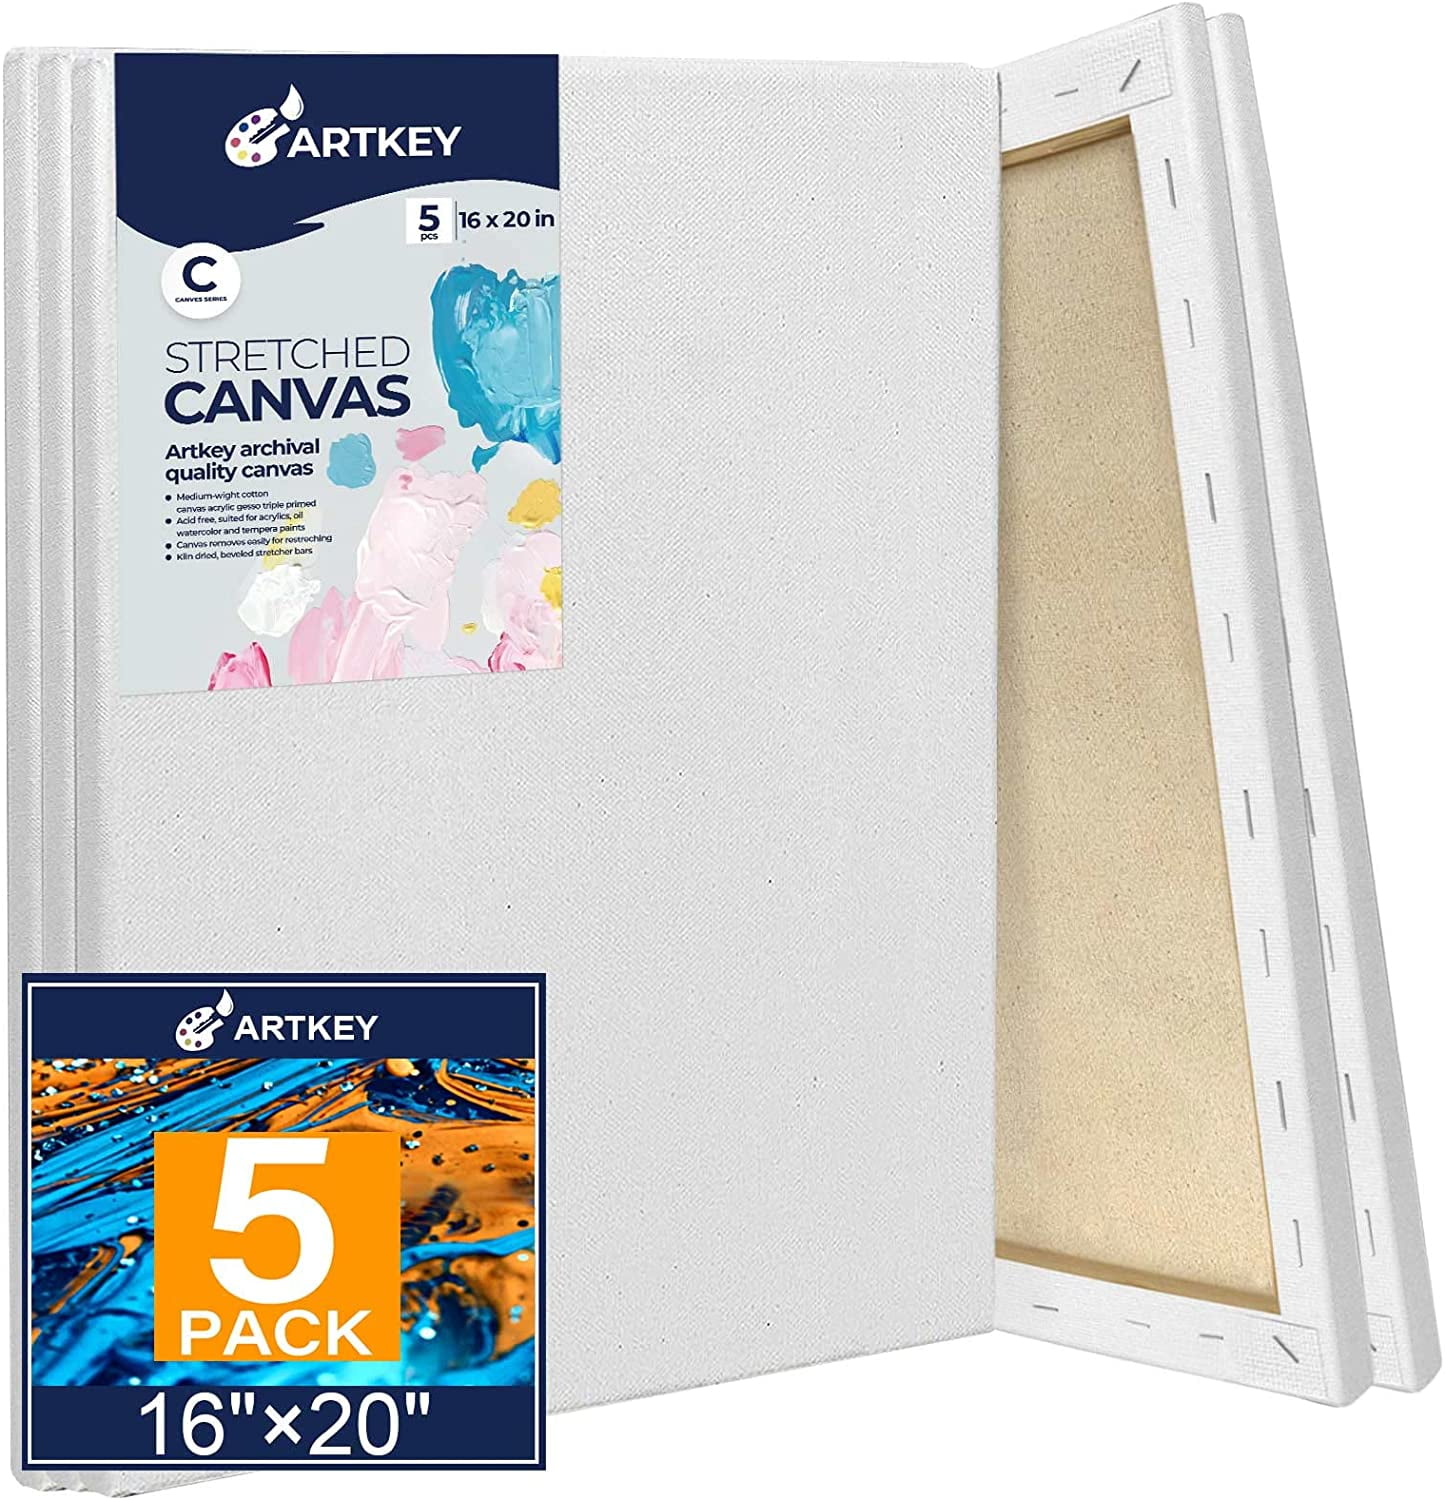 goldentime 4 Packs 8 inch Pre Drawn Canvas Kit Paint by Numbers for Kids  Stretched Canvaes with Picture Pre-Printed Acrylic Painting Set Age 8-12  9-12 4-8 4Packs 8x8